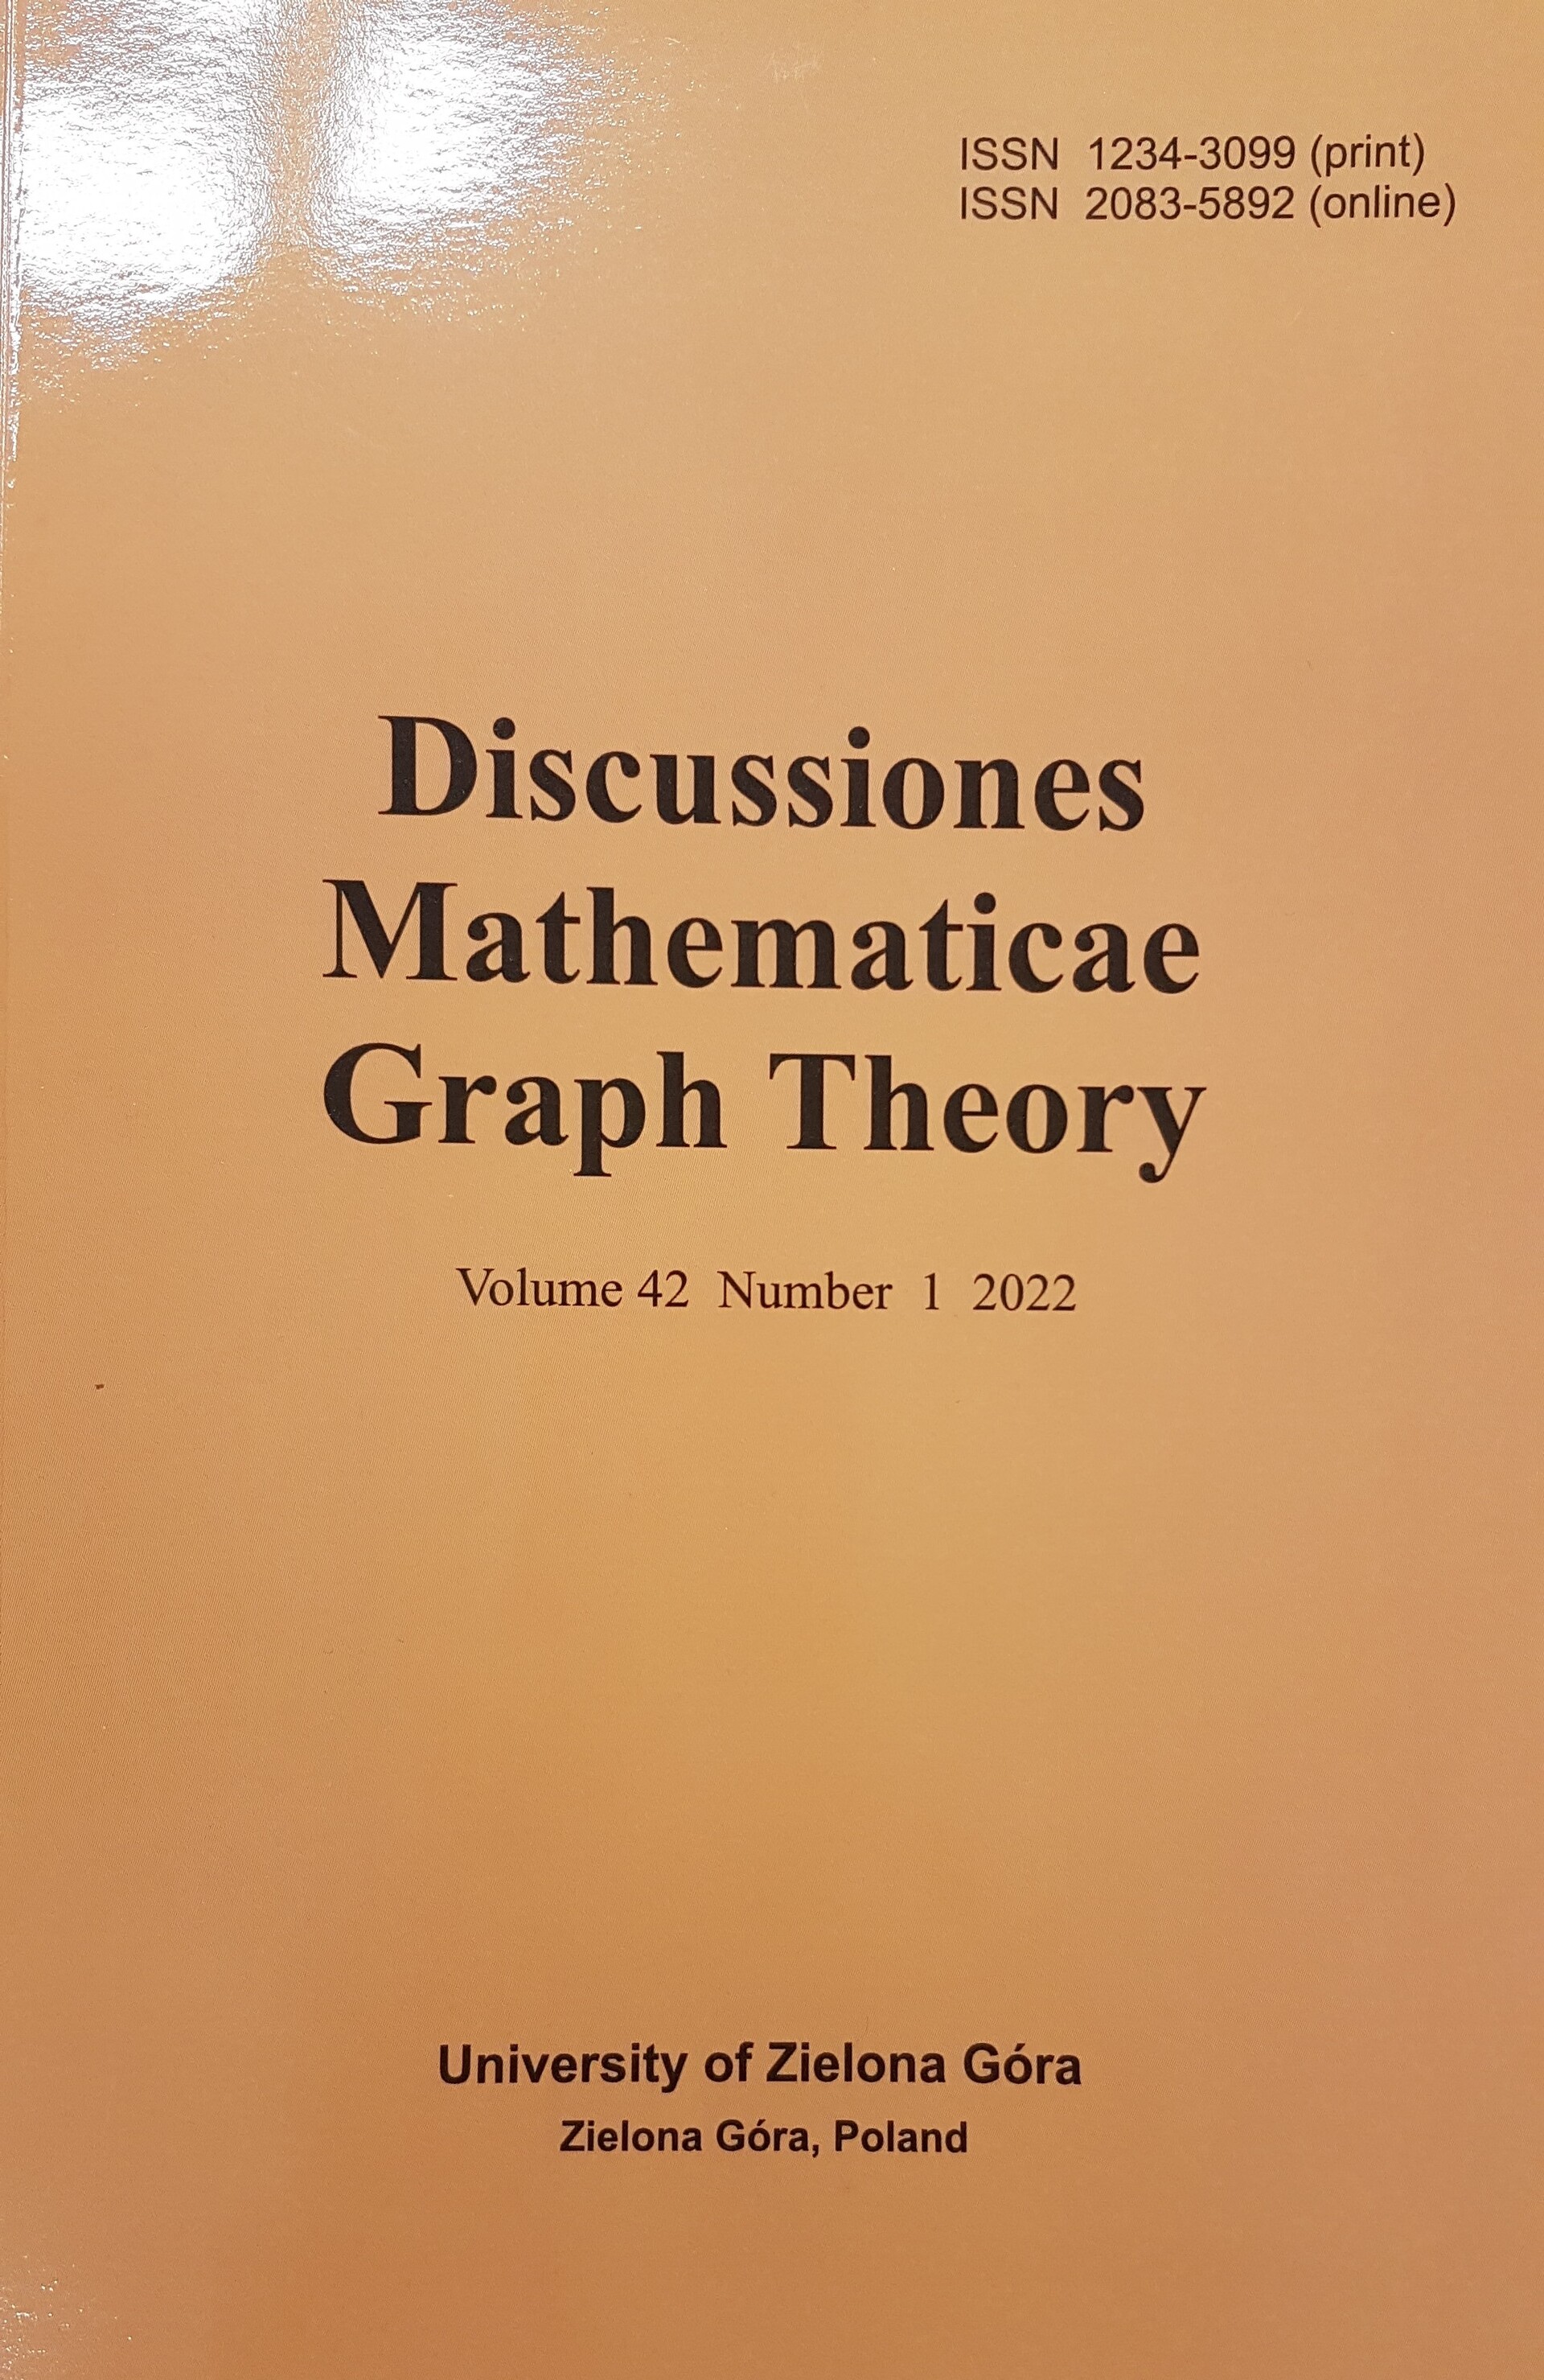 3discussiones_mathematicae_graph_theory-1.jpg